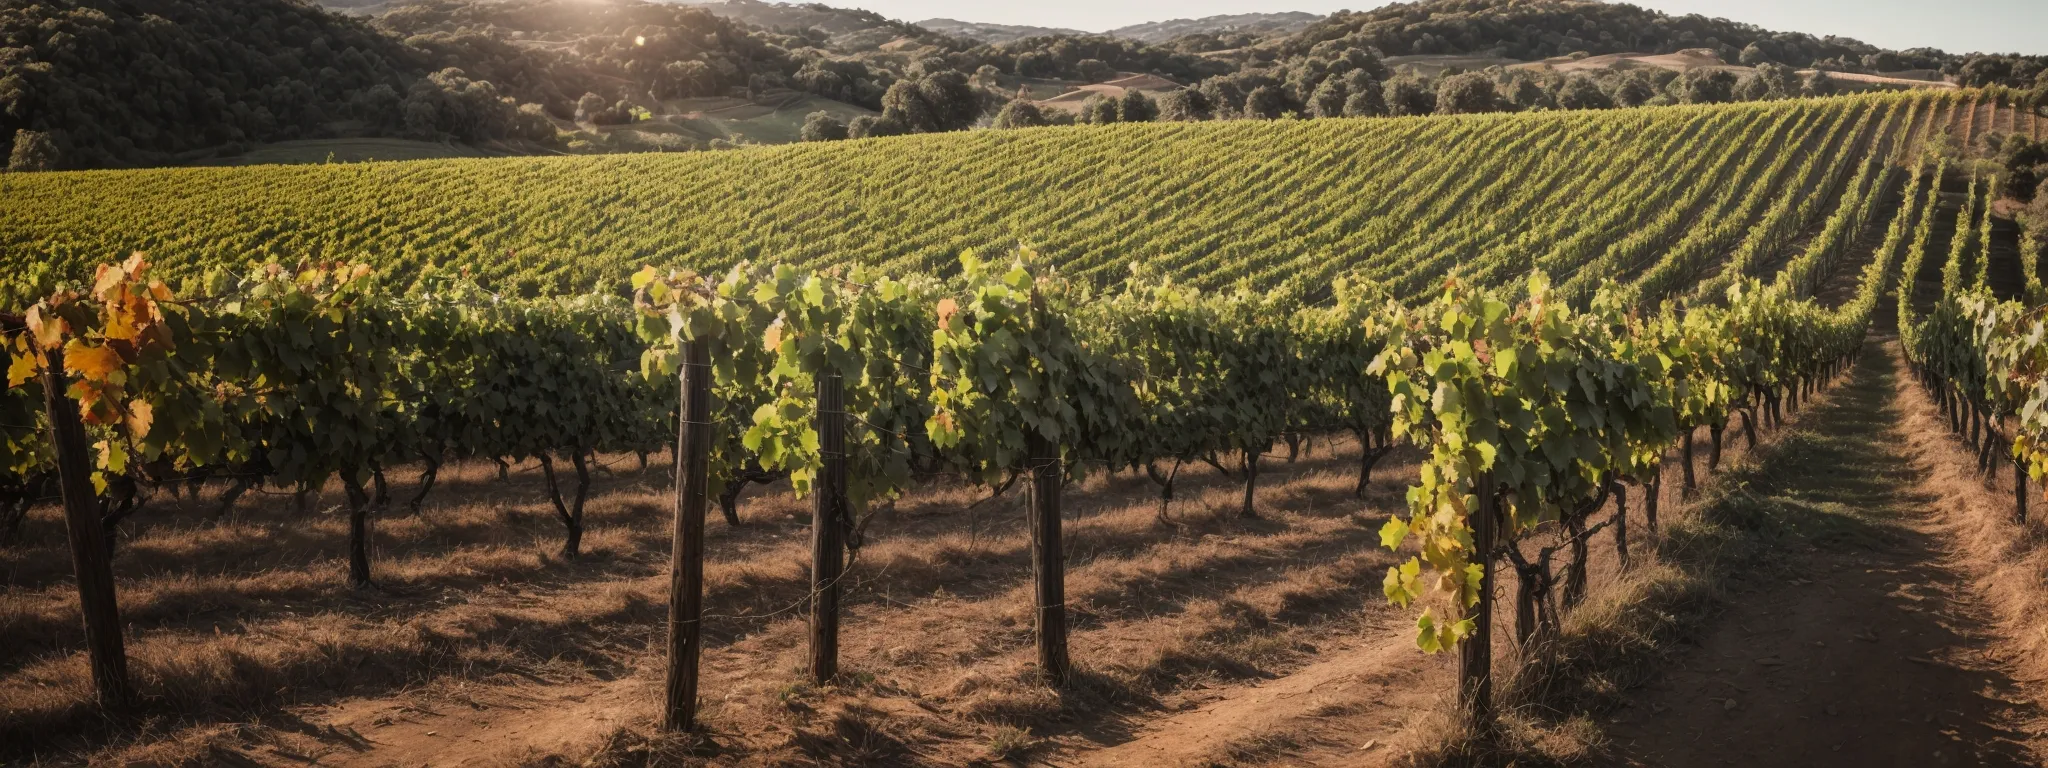 a rustic vineyard panorama with rows of grapevines under a clear sky, evoking a sense of local charm.